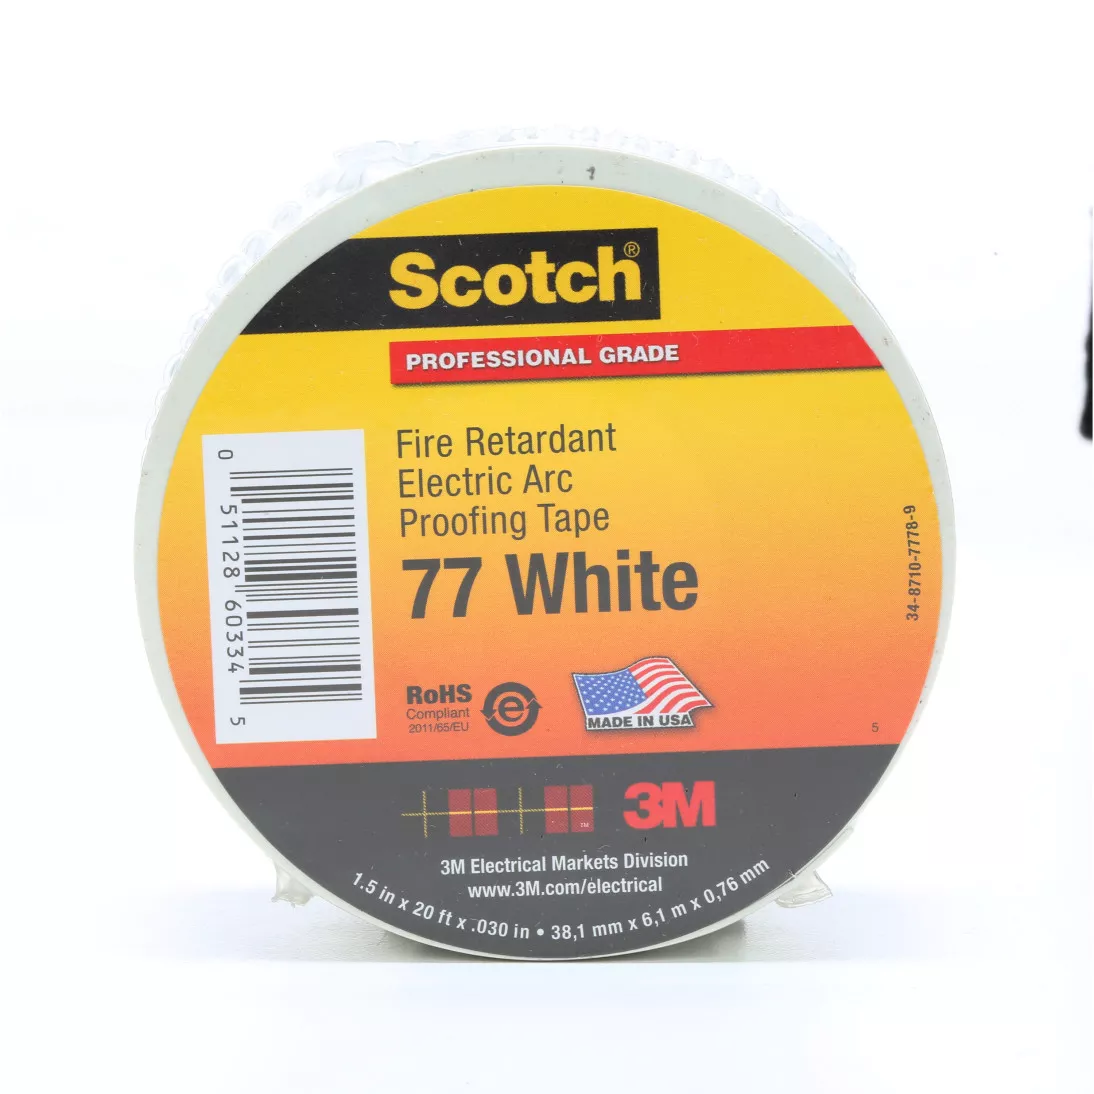 Scotch® Fire-Retardant Electric Arc Proofing Tape 77W, 1-1/2 in x 20 ft,
White/Gray, 1 roll/carton, 10 rolls/Case